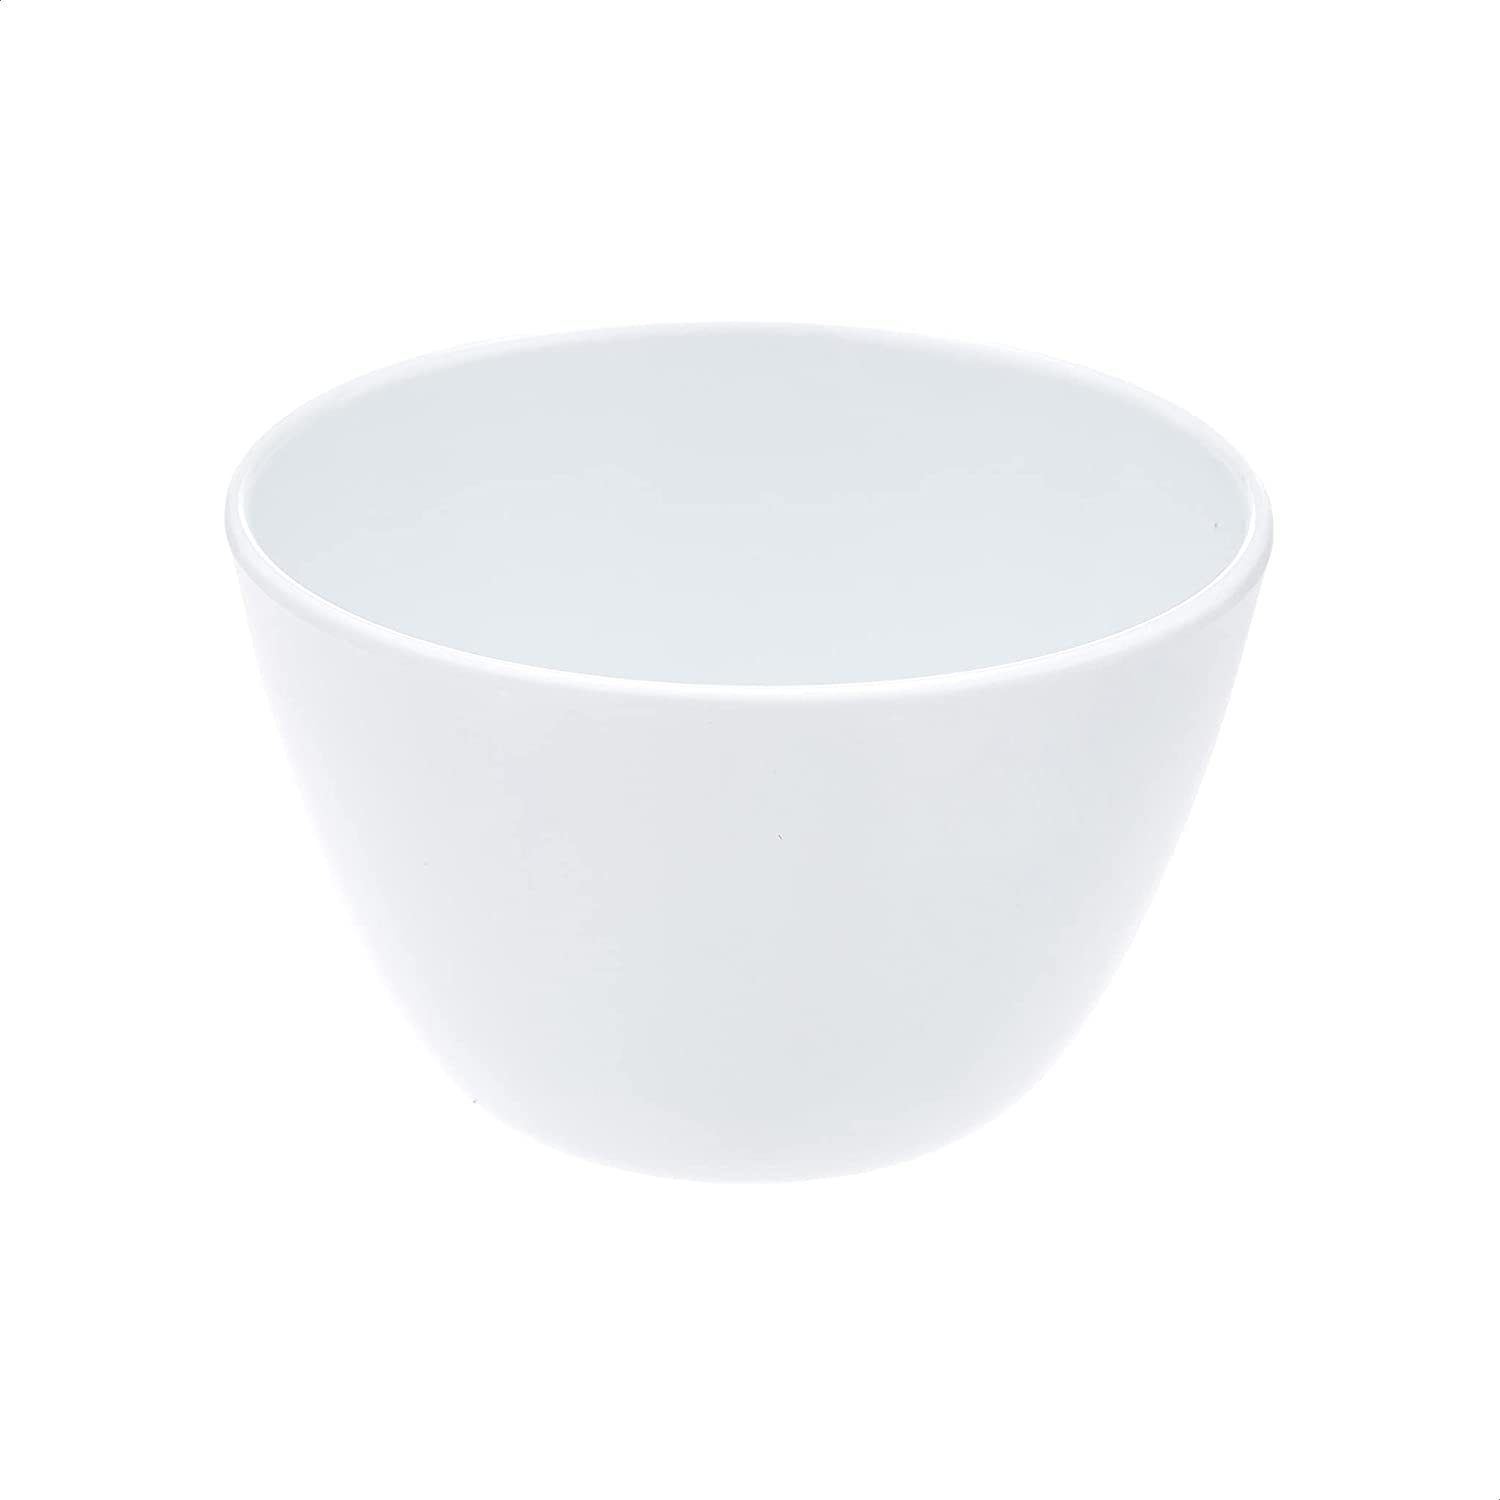 Best Seller in Europe and America 6-Inch Salad Bowl Melamine Bowl Drop-Resistant Melamine Tableware Customizable Color Logo Food Safety